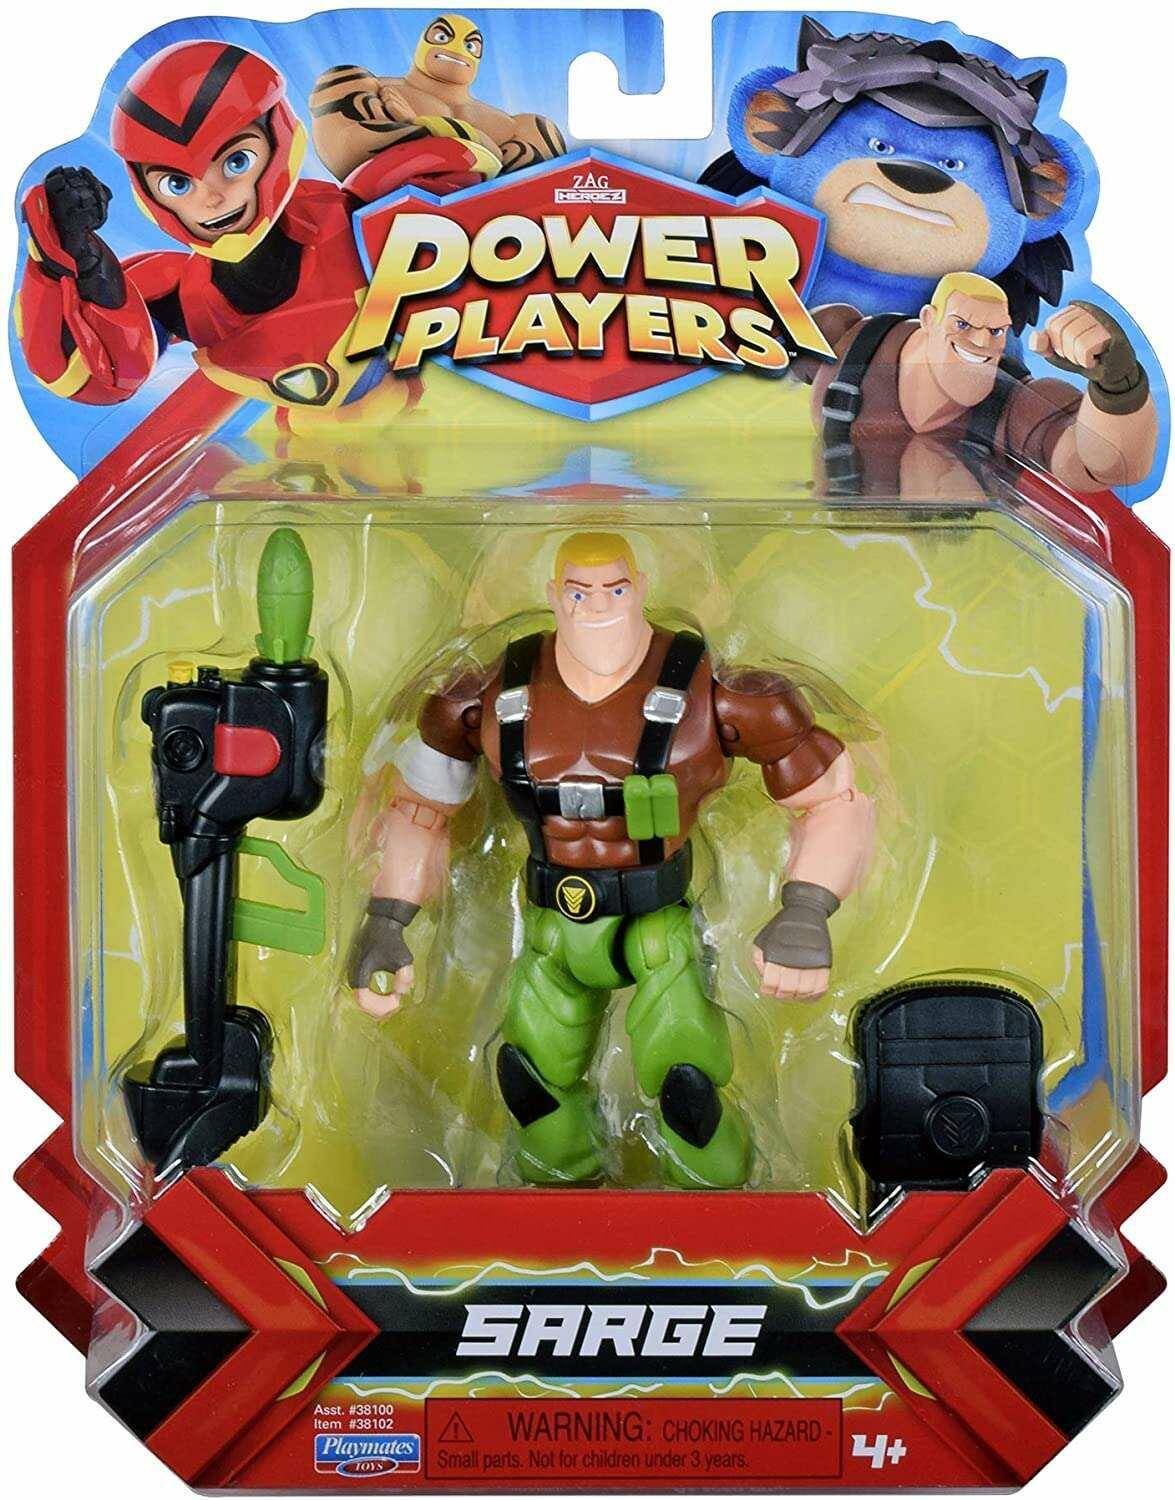 POWER PLAYERS FIG.SARGE CHARGE 38152